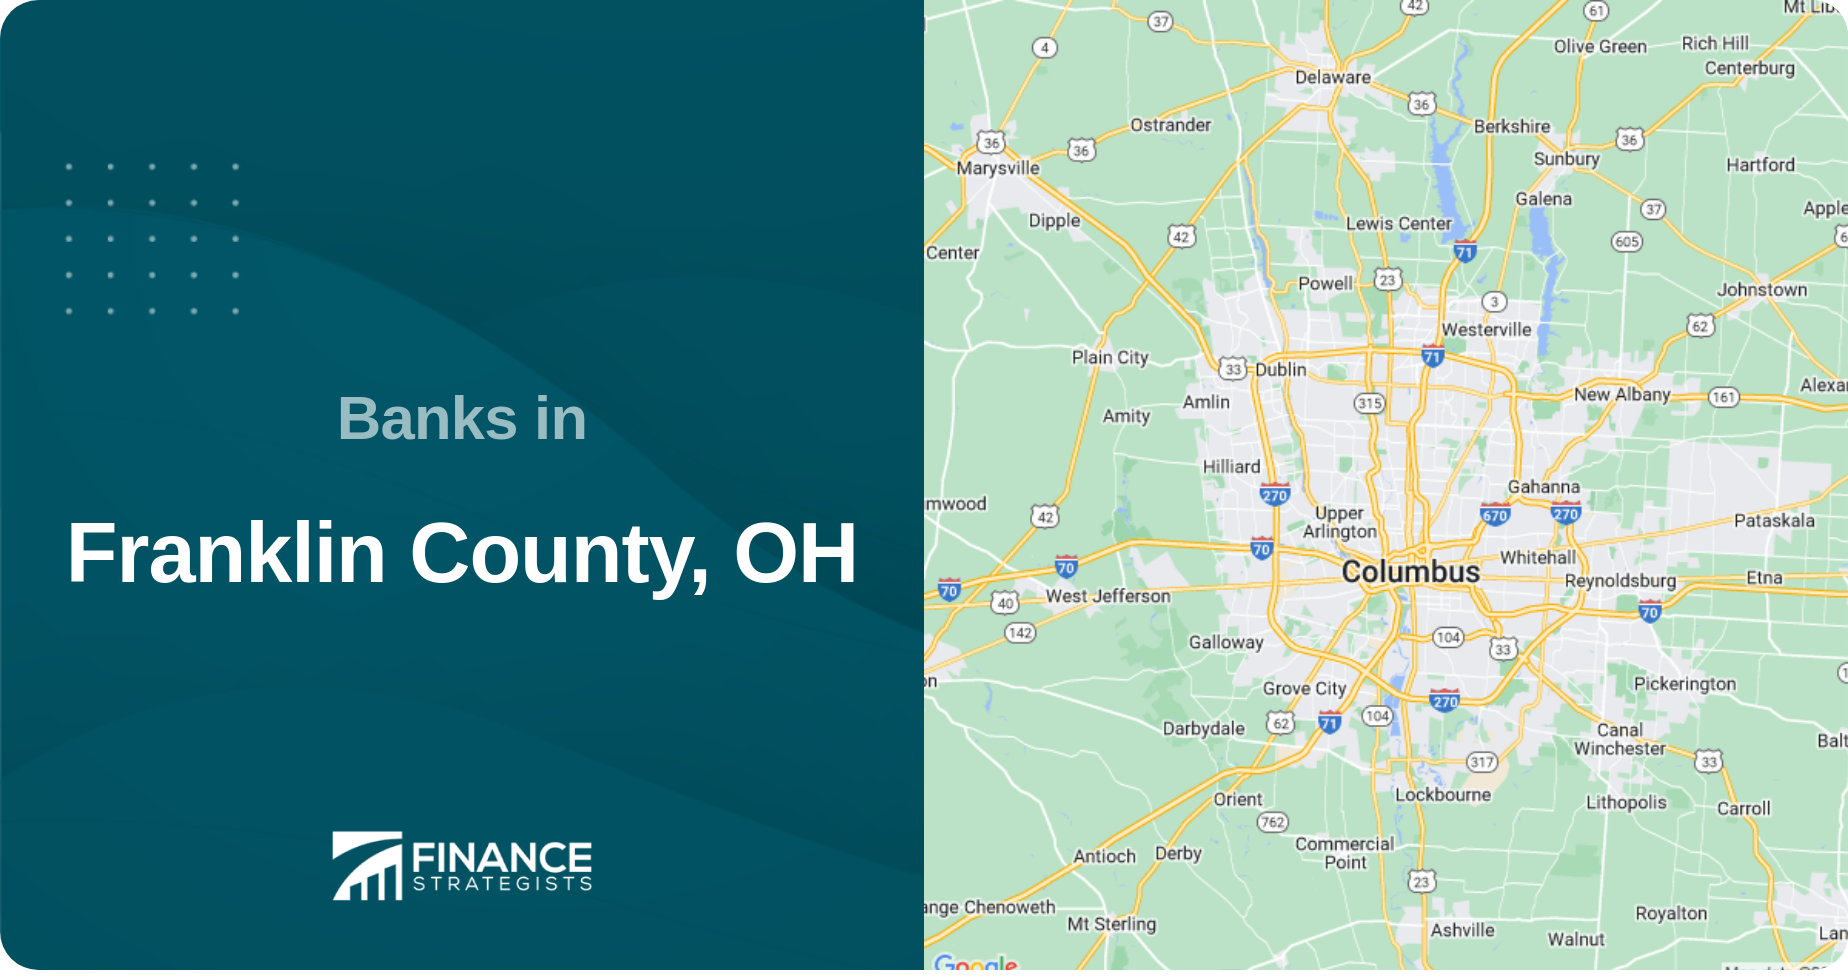 Banks in Franklin County, OH